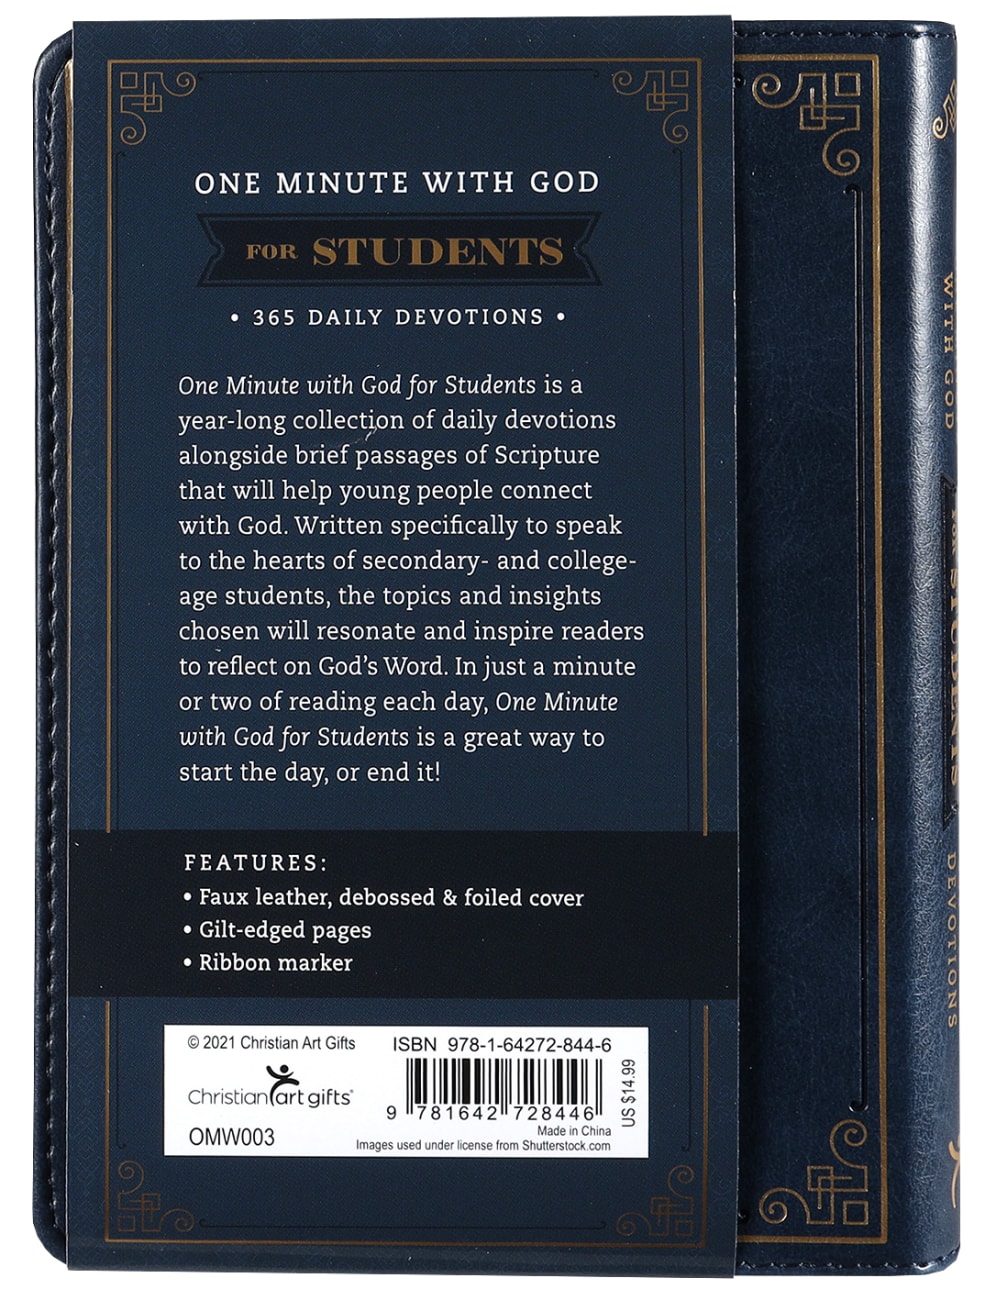 One Minute With God For Students: 365 Daily Devotions Imitation Leather